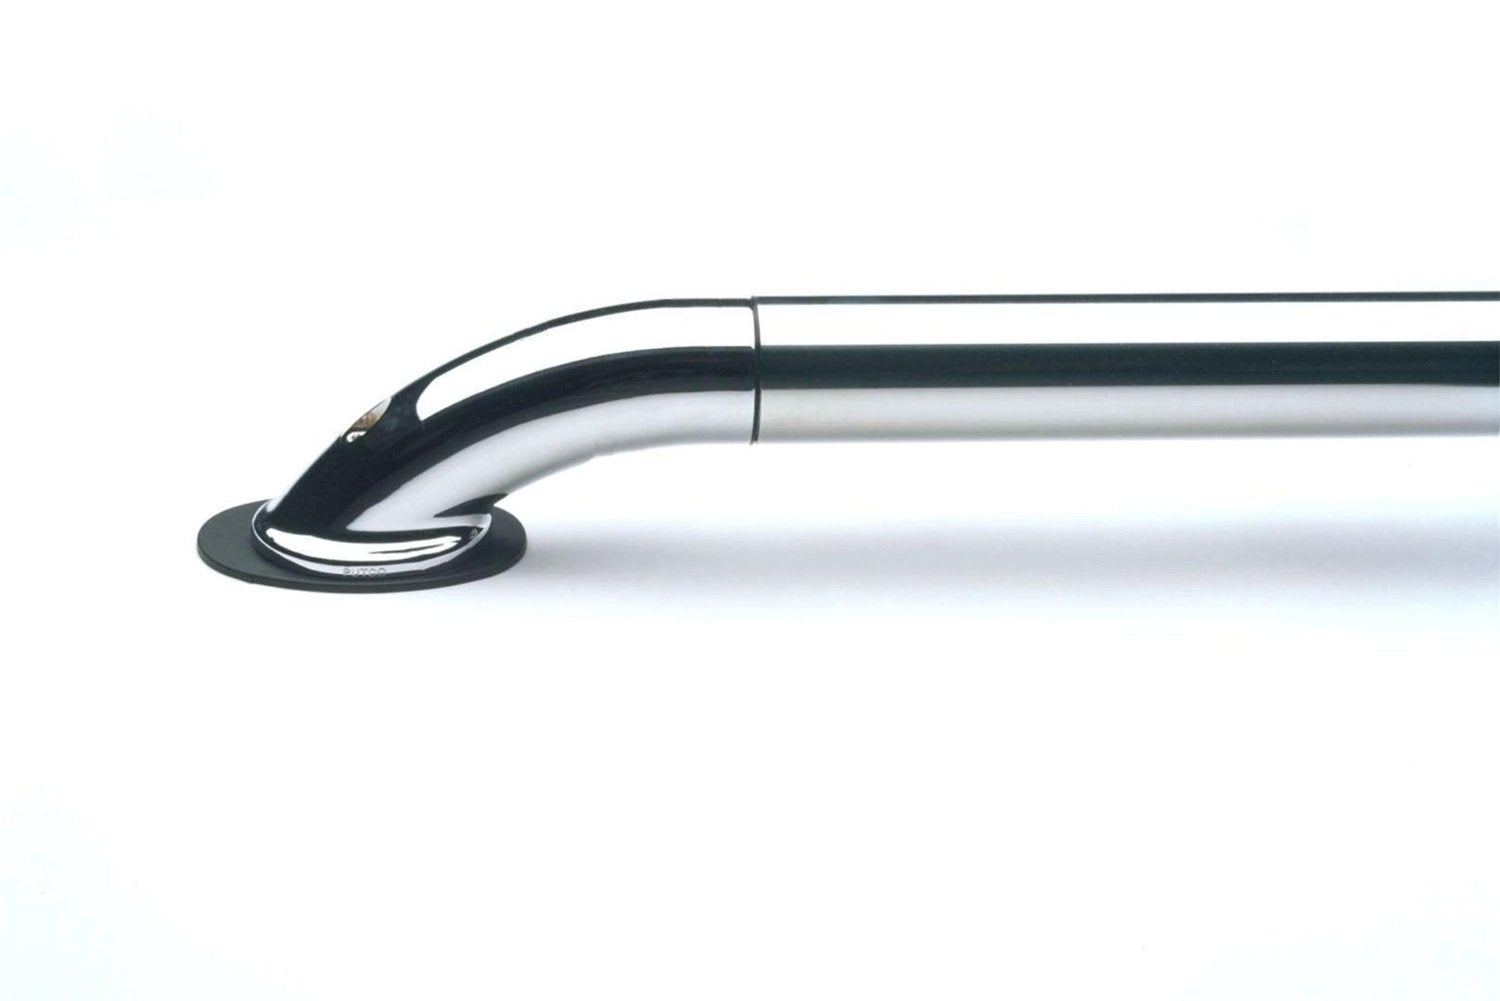 Putco 59896 Bed Rails, Approx. 6 ft. 5 in. Polished